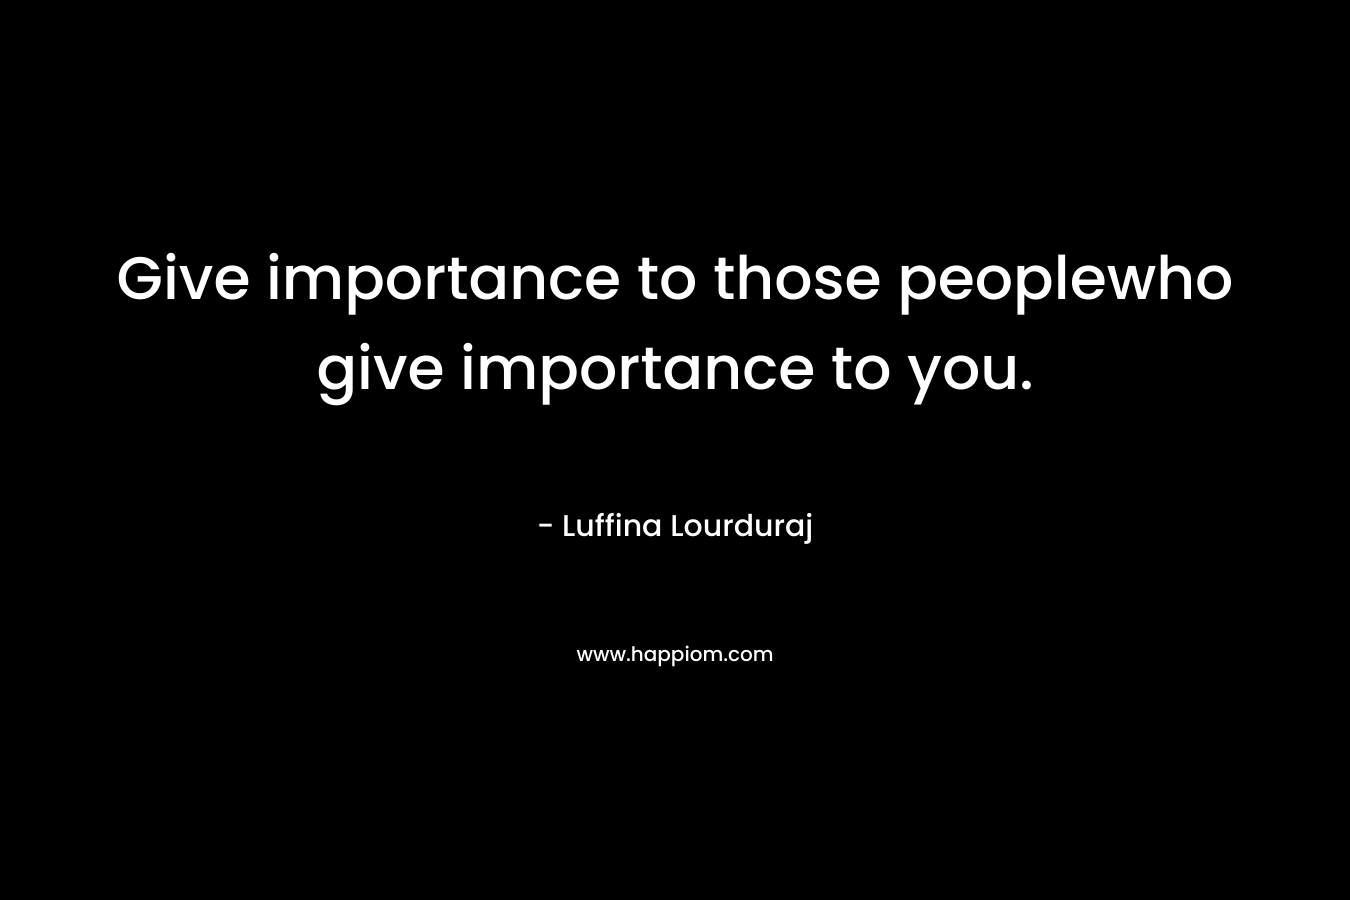 Give importance to those peoplewho give importance to you.